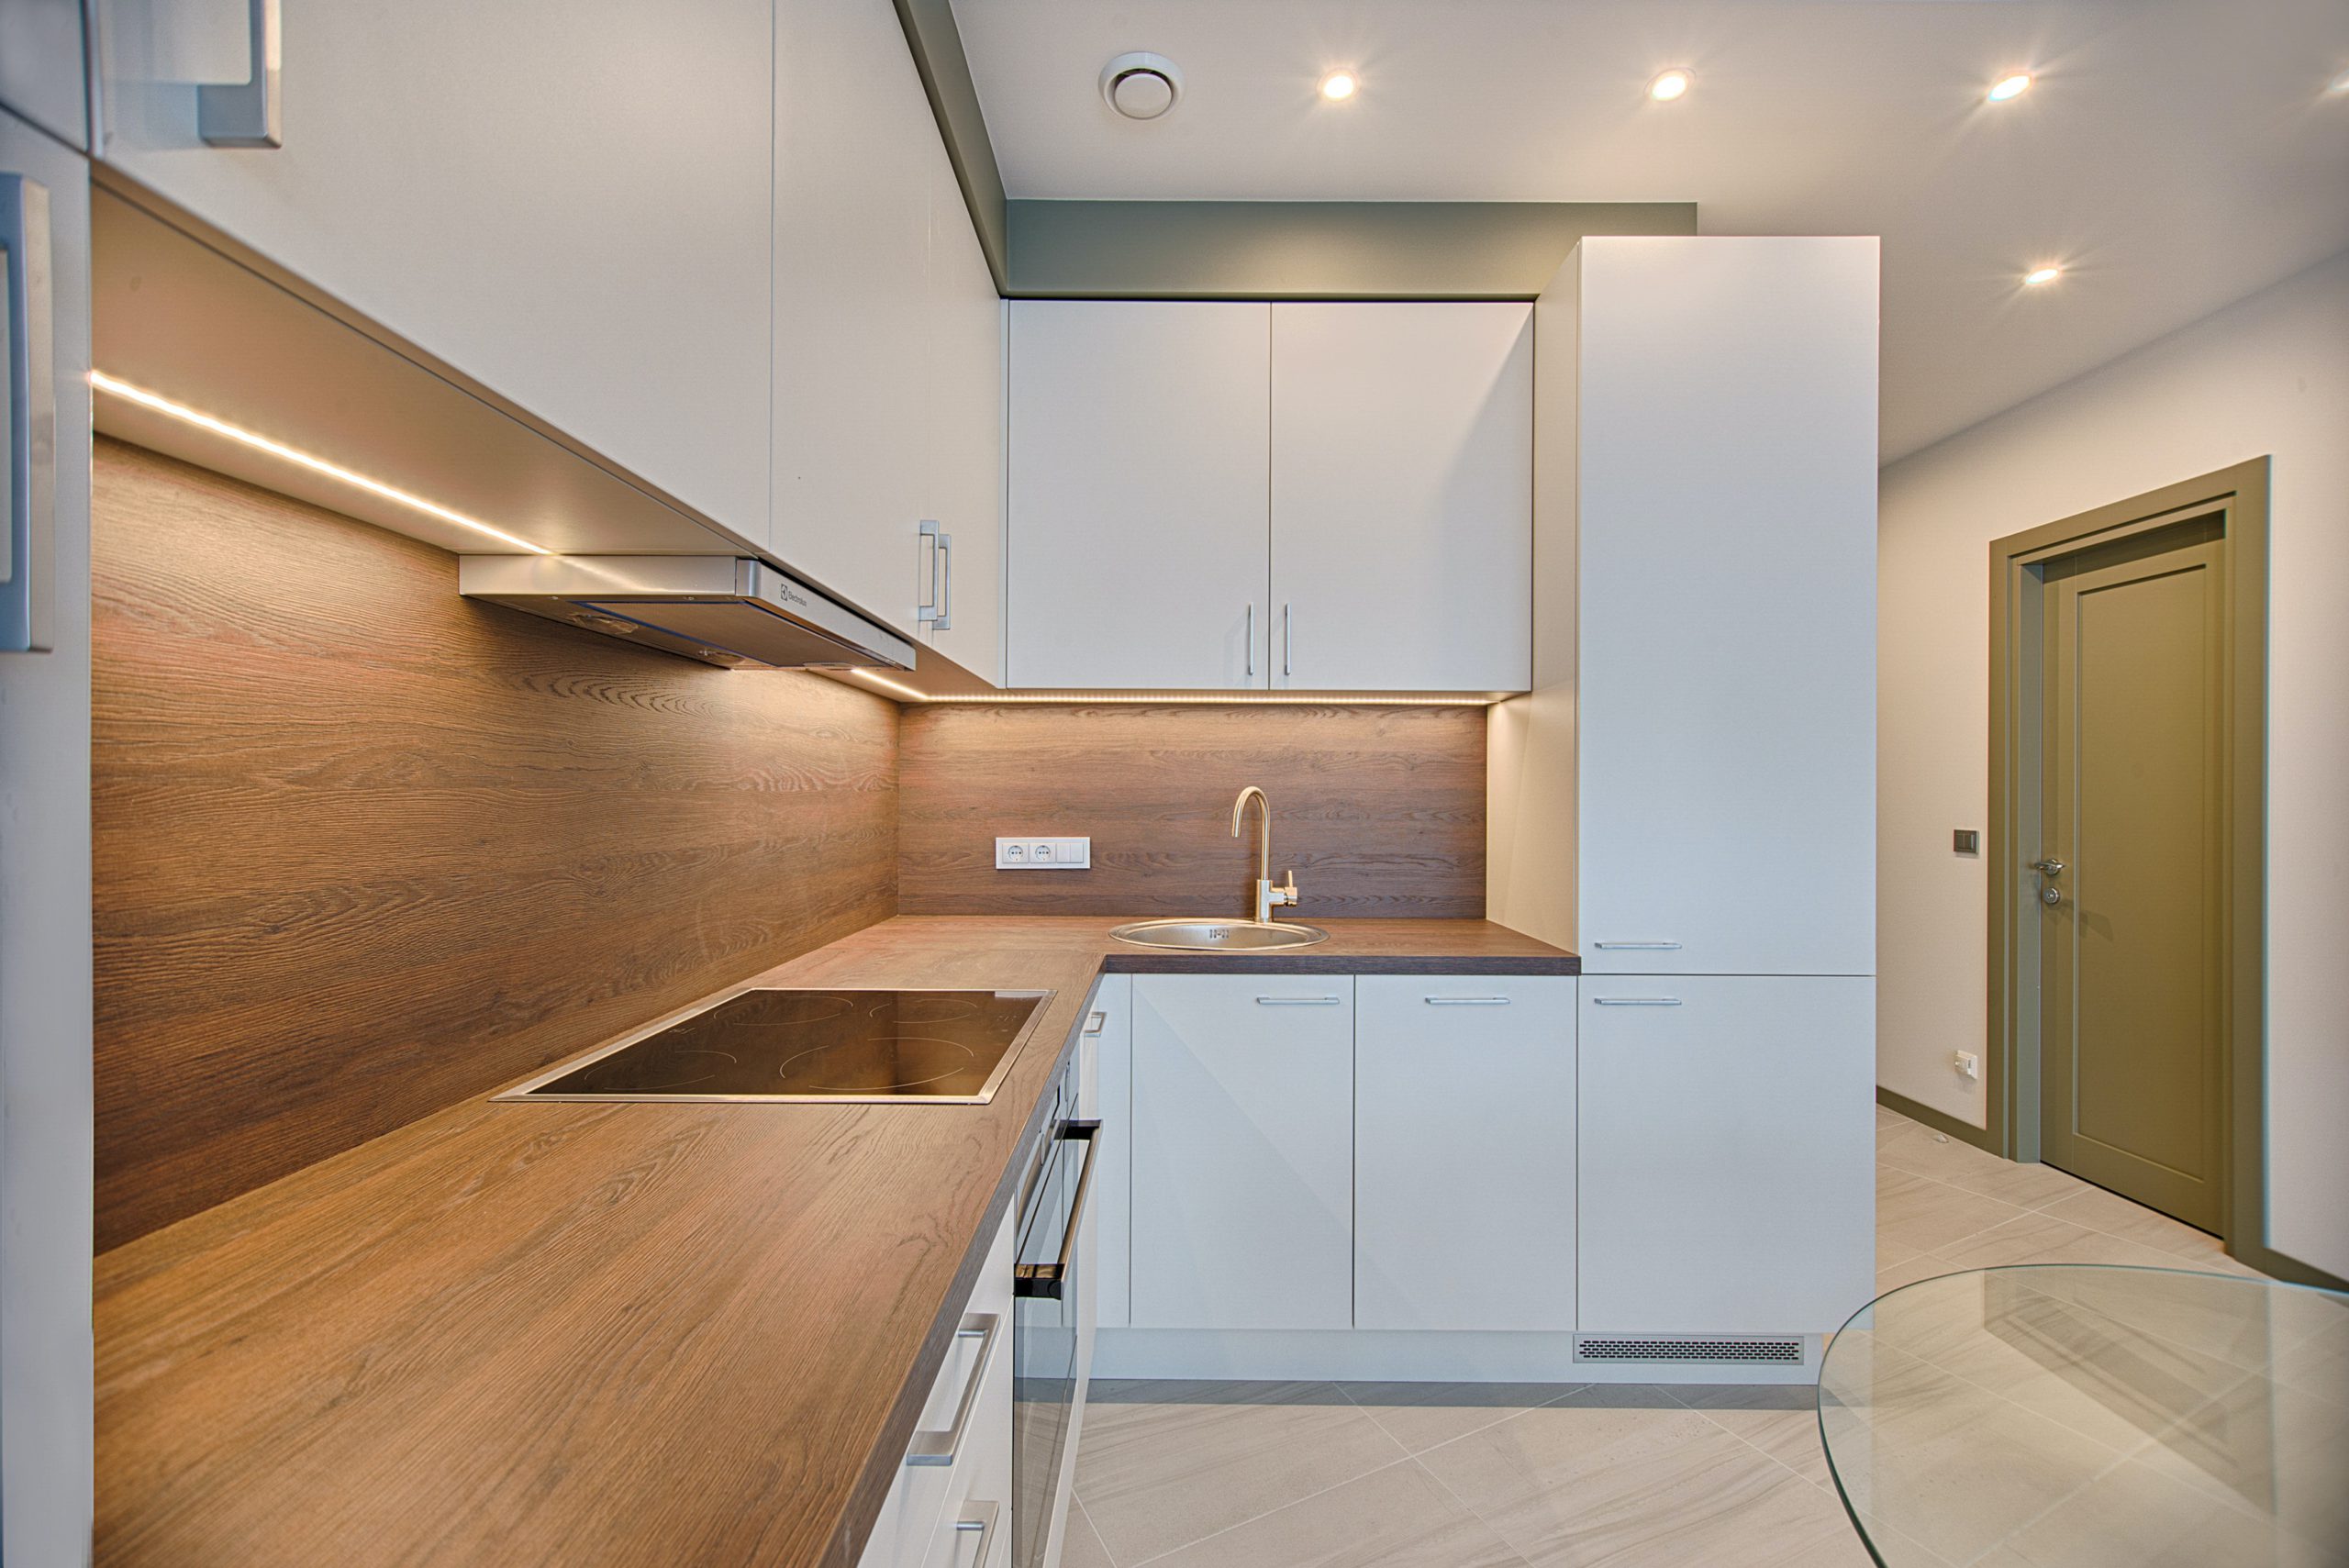 Modern kitchen with nothing on wooden style countertops and minimalist cupboards